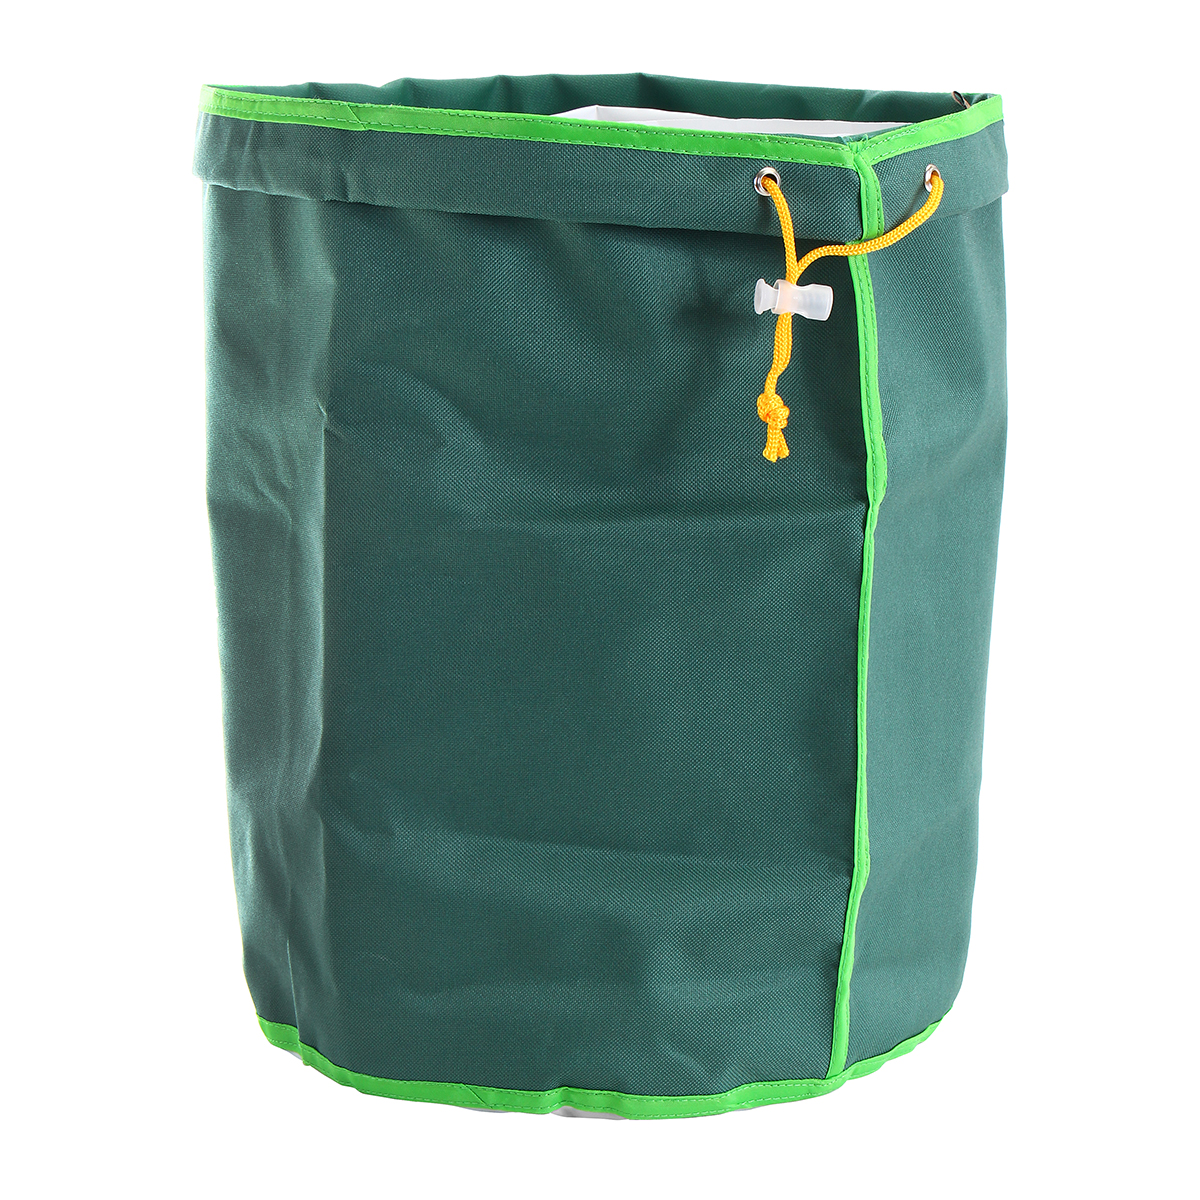 5-Gallon-Filter-Hash-Bag-Ice-Bubble-Herbal-Plant-Extractor-With-Pressing-Mesh-Screen-1329230-10